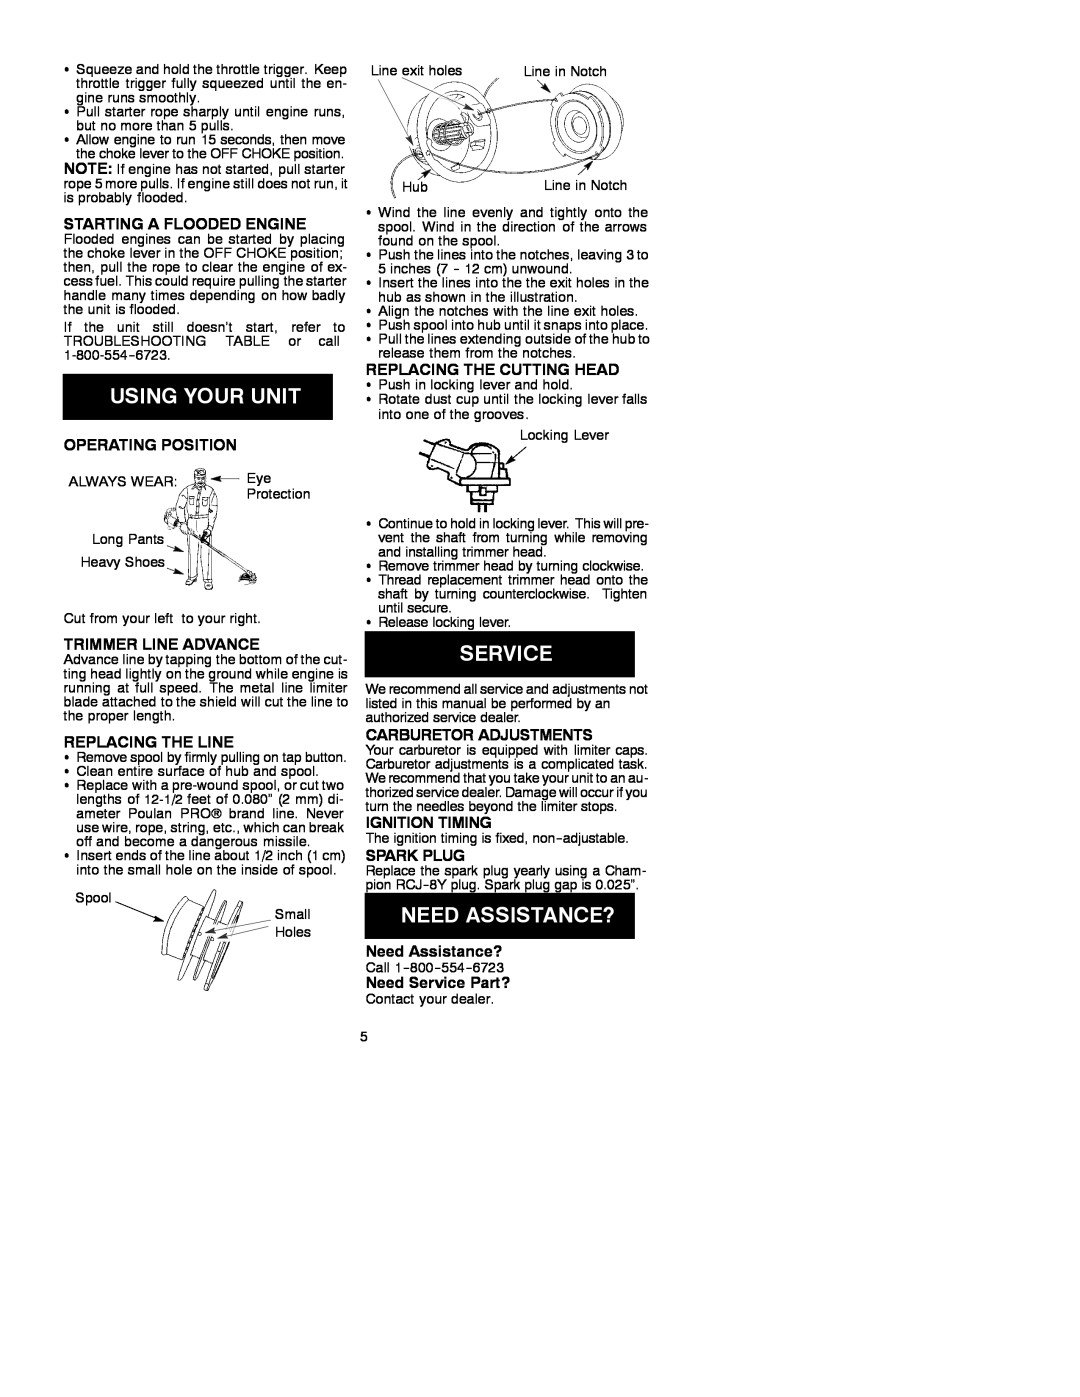 Poulan 2001-05, 530088909 instruction manual Starting A Flooded Engine 